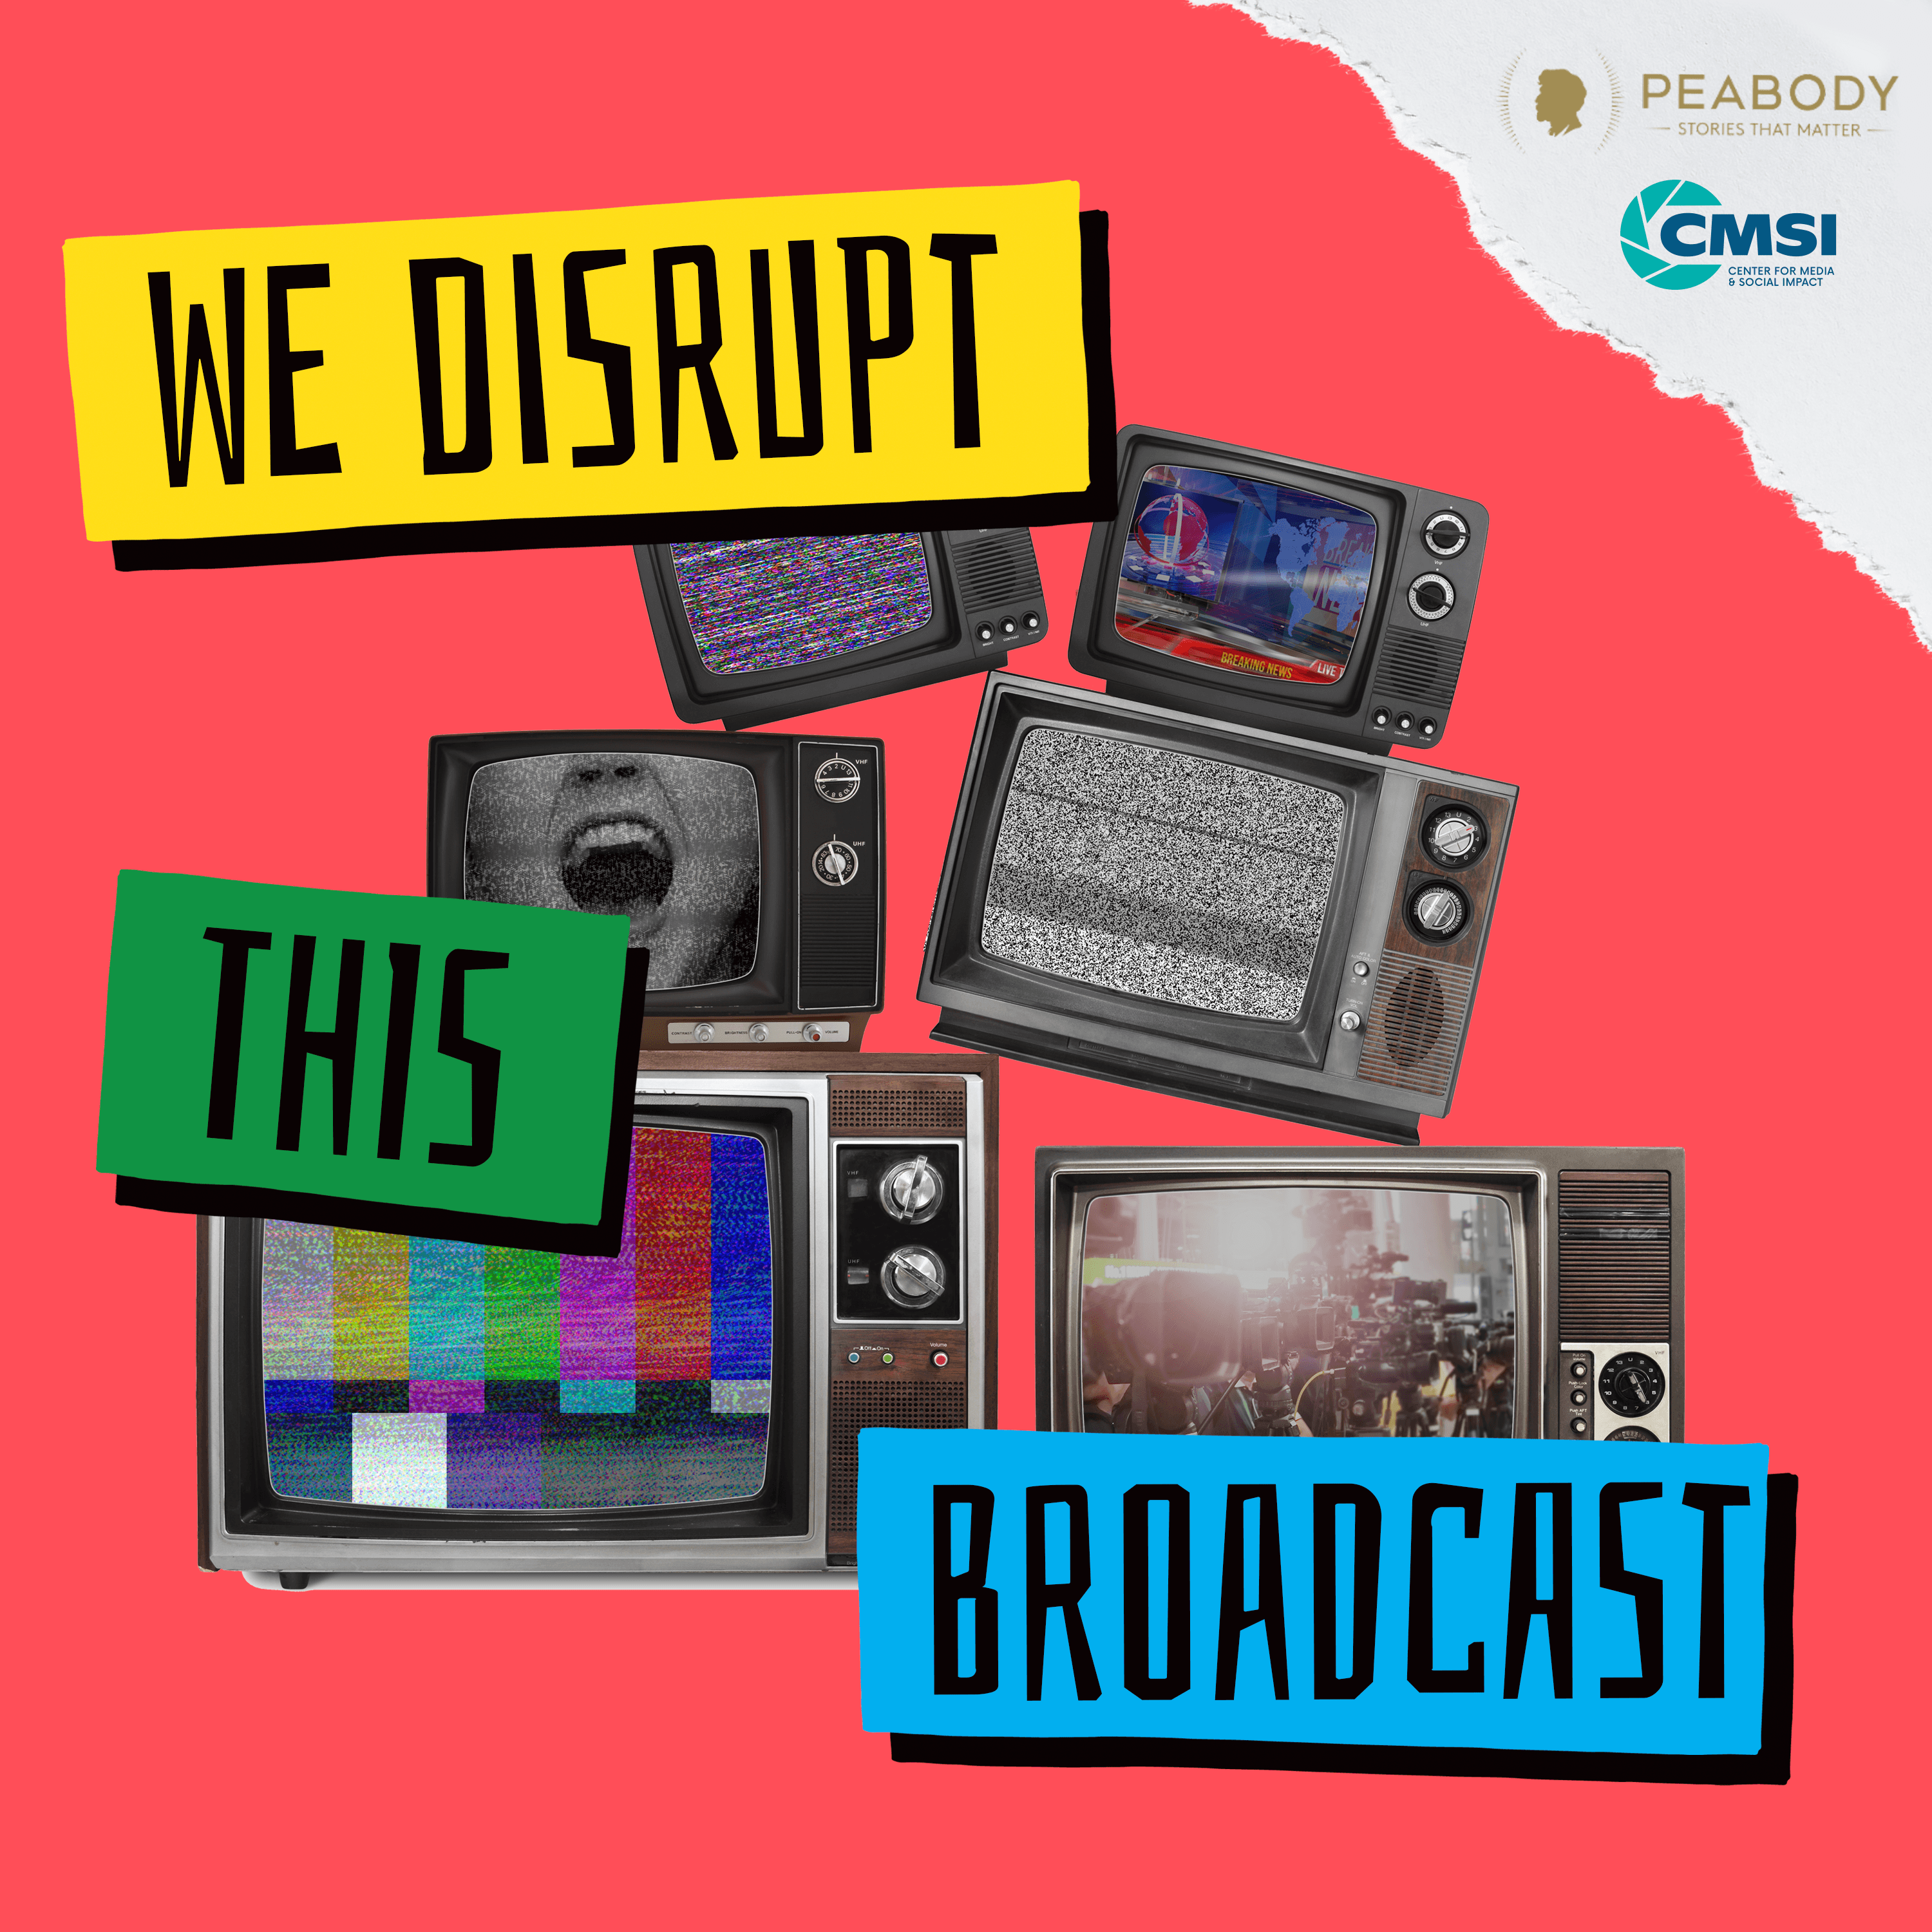 Thumbnail for "Trailer – We Disrupt This Broadcast".